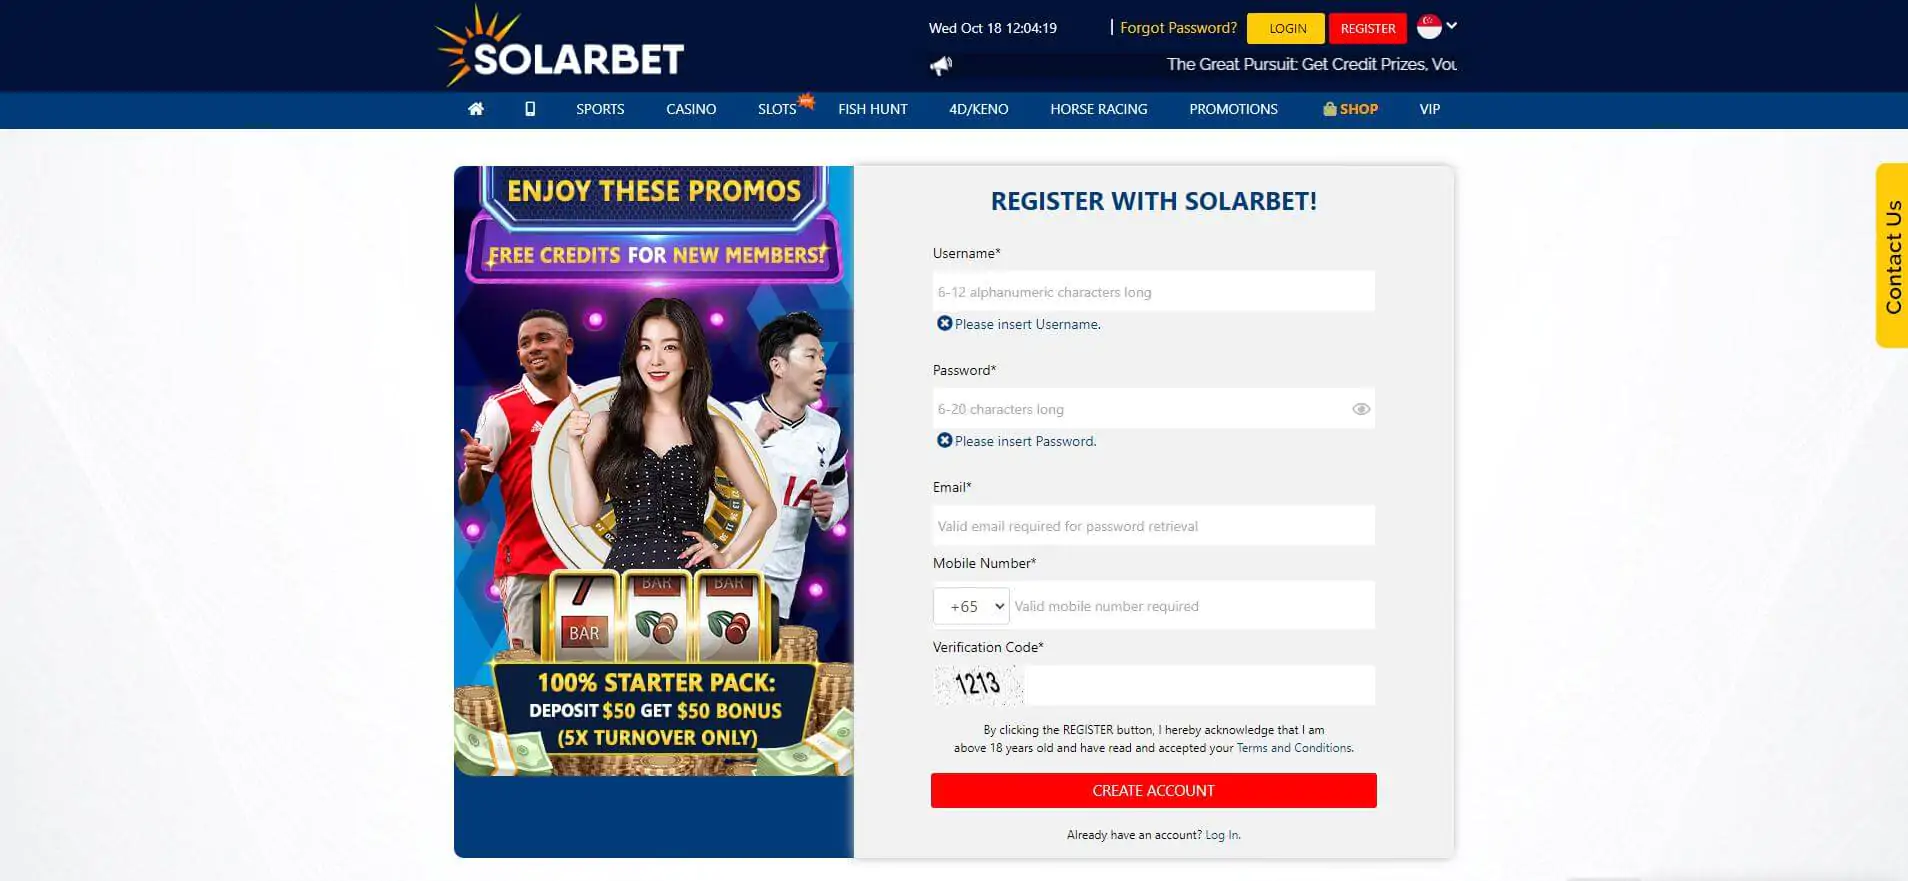 Registering for a Solarbet Casino Account